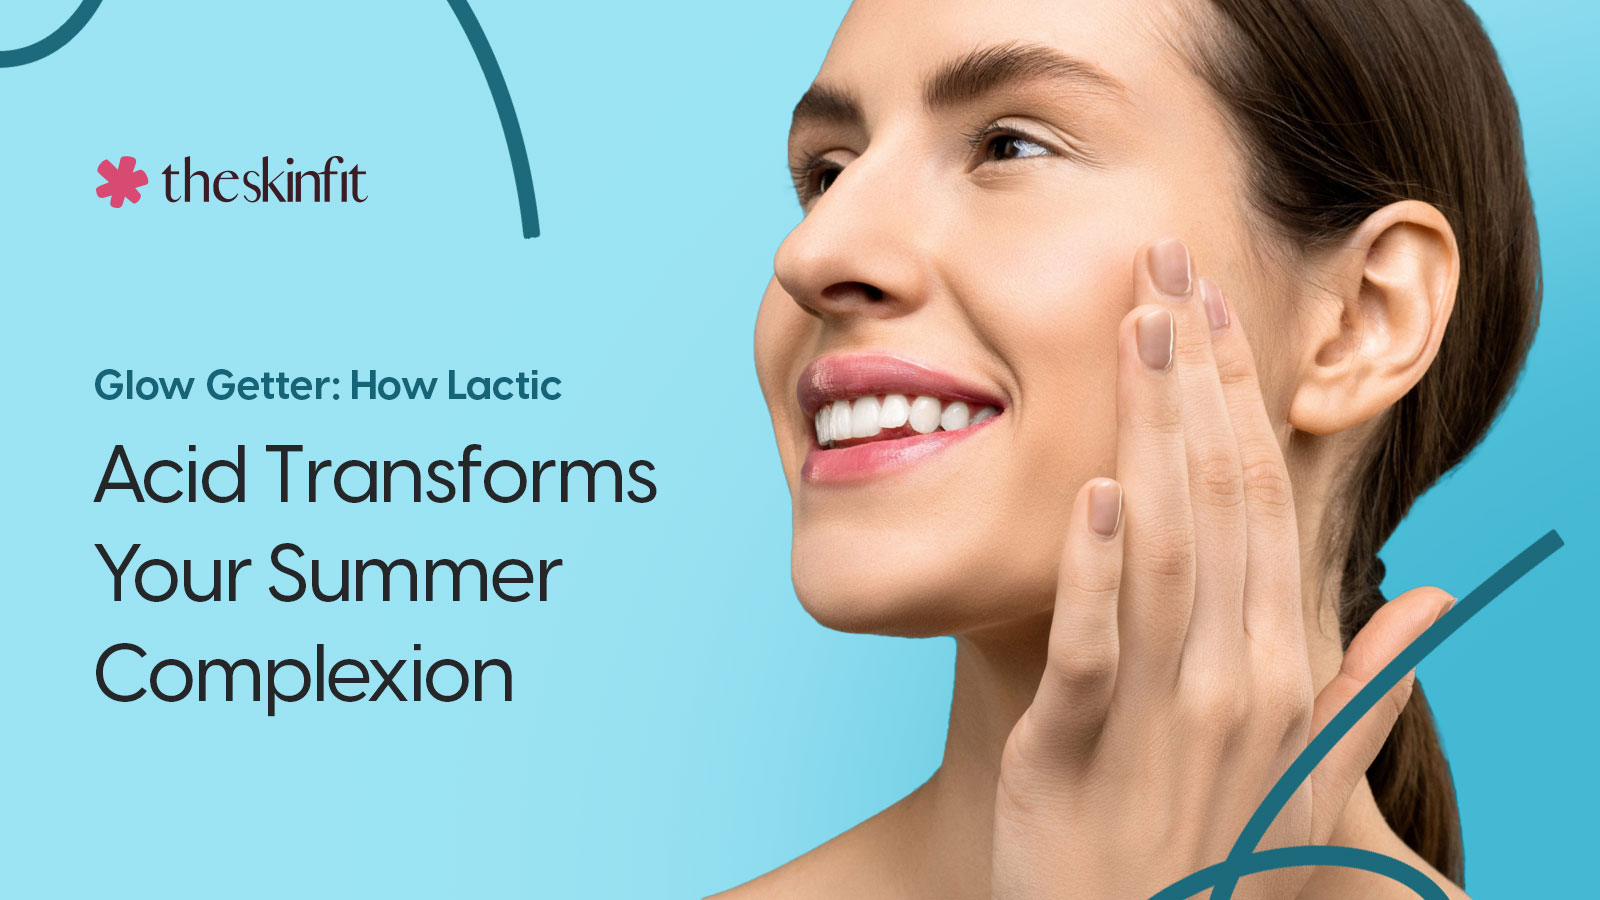 Glow Getter: How Lactic Acid Transforms Your Summer Complexion